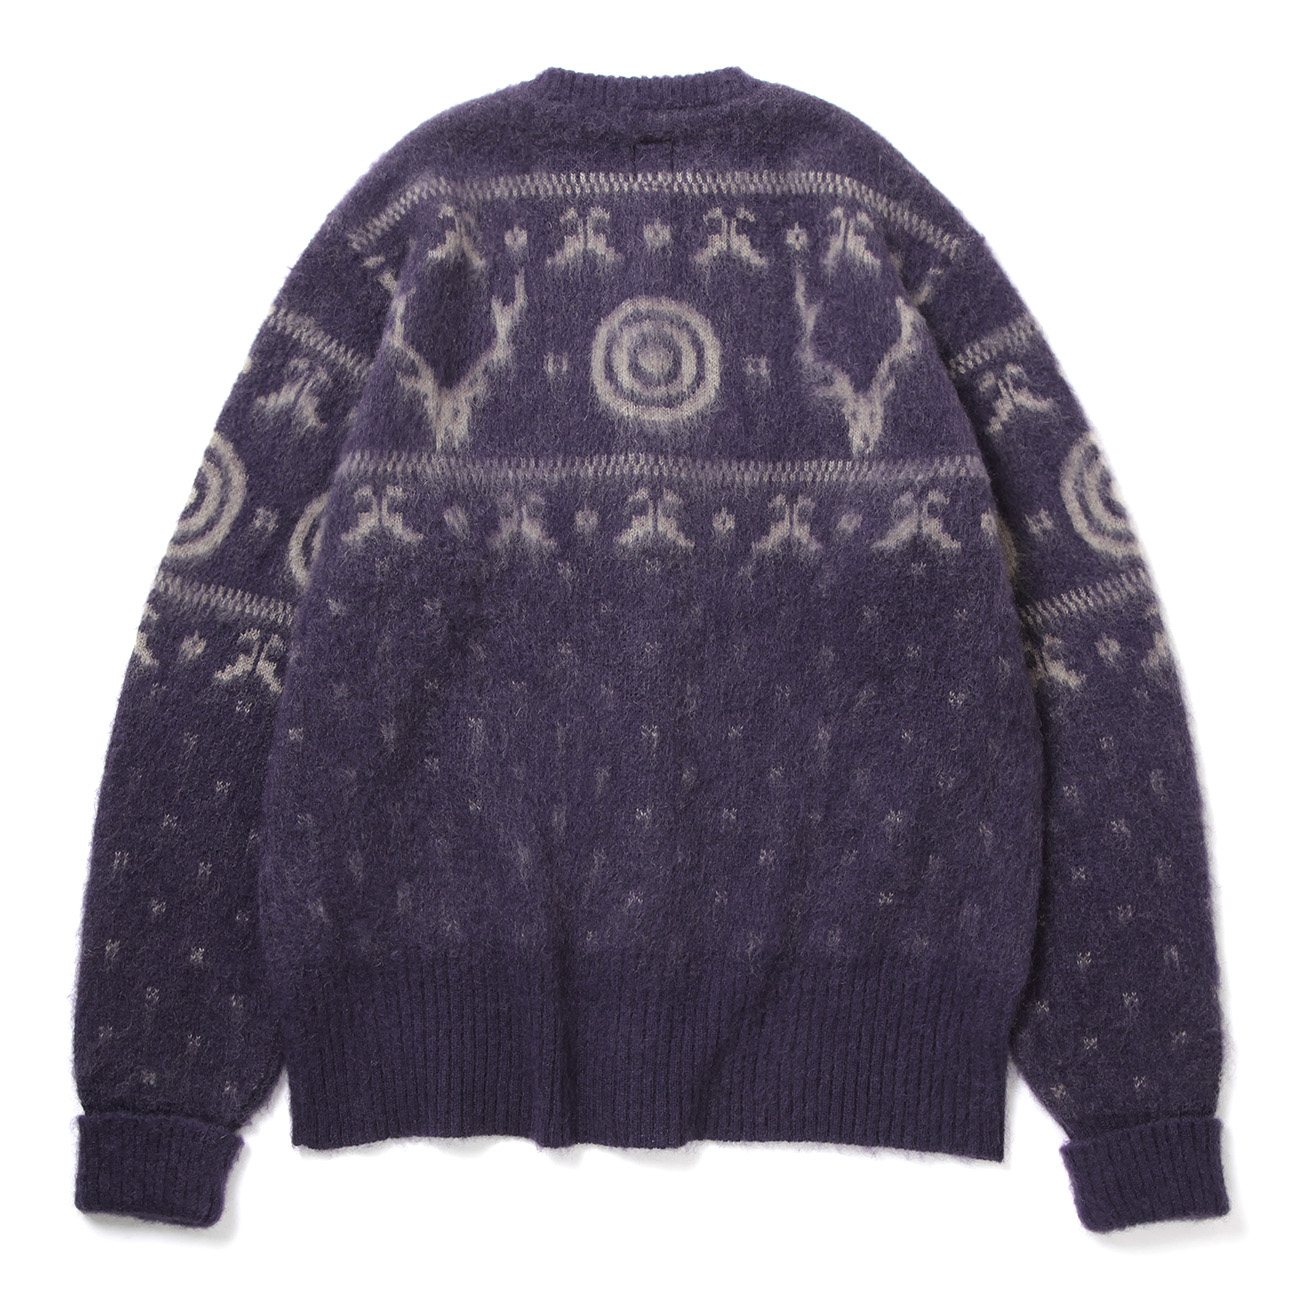 SOUTH2 WEST8 crew neck mohair sweater | camillevieraservices.com